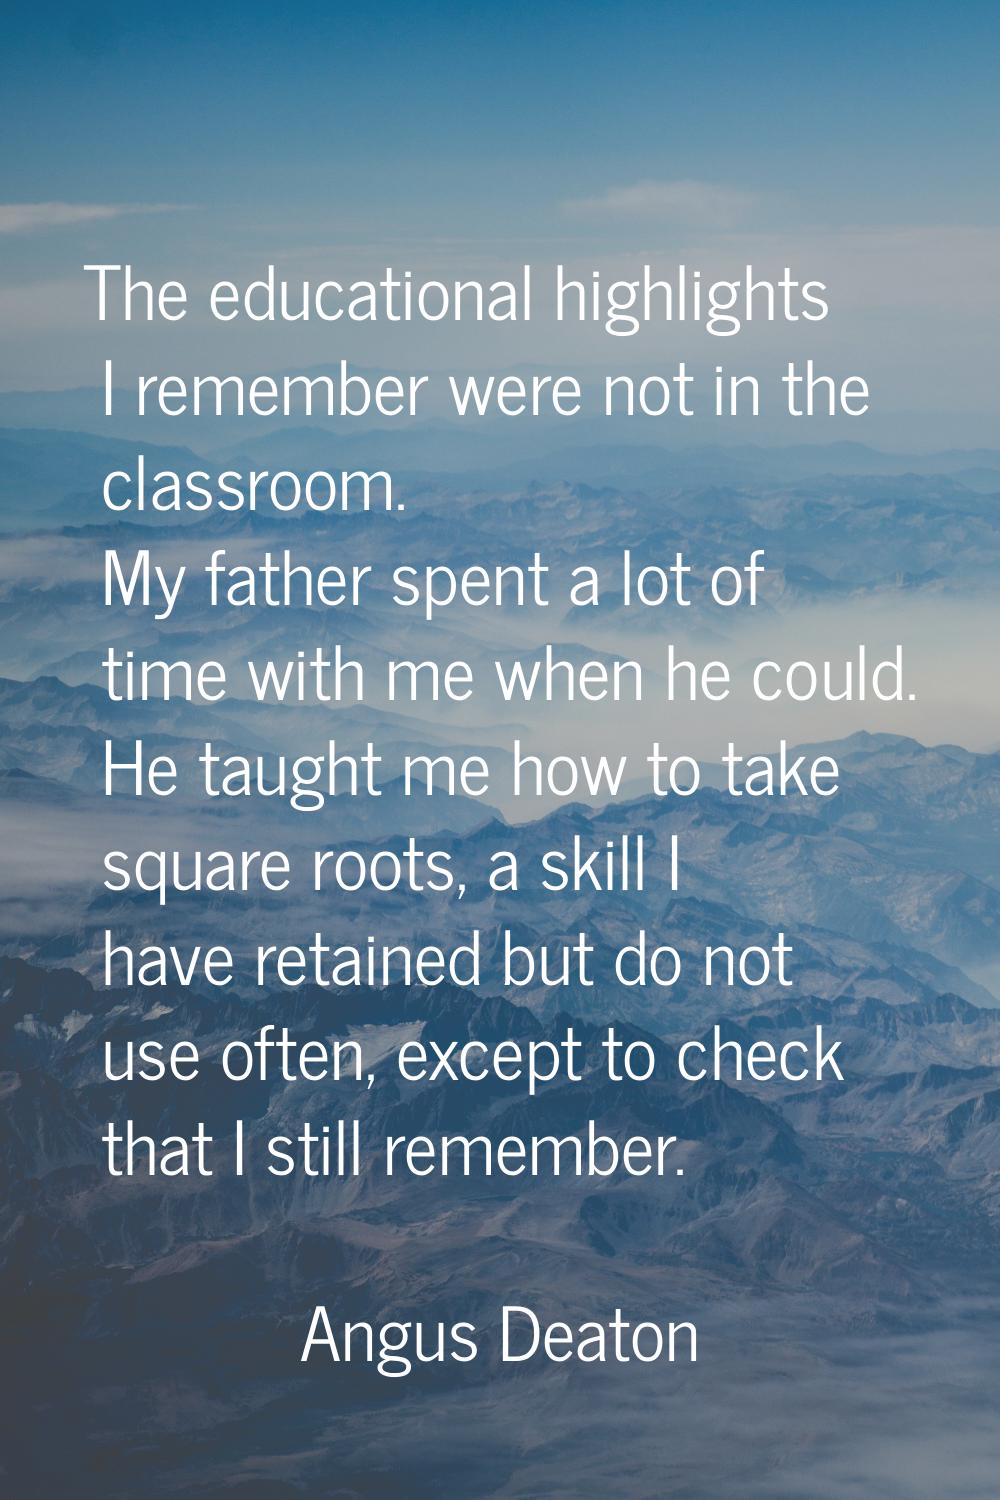 The educational highlights I remember were not in the classroom. My father spent a lot of time with